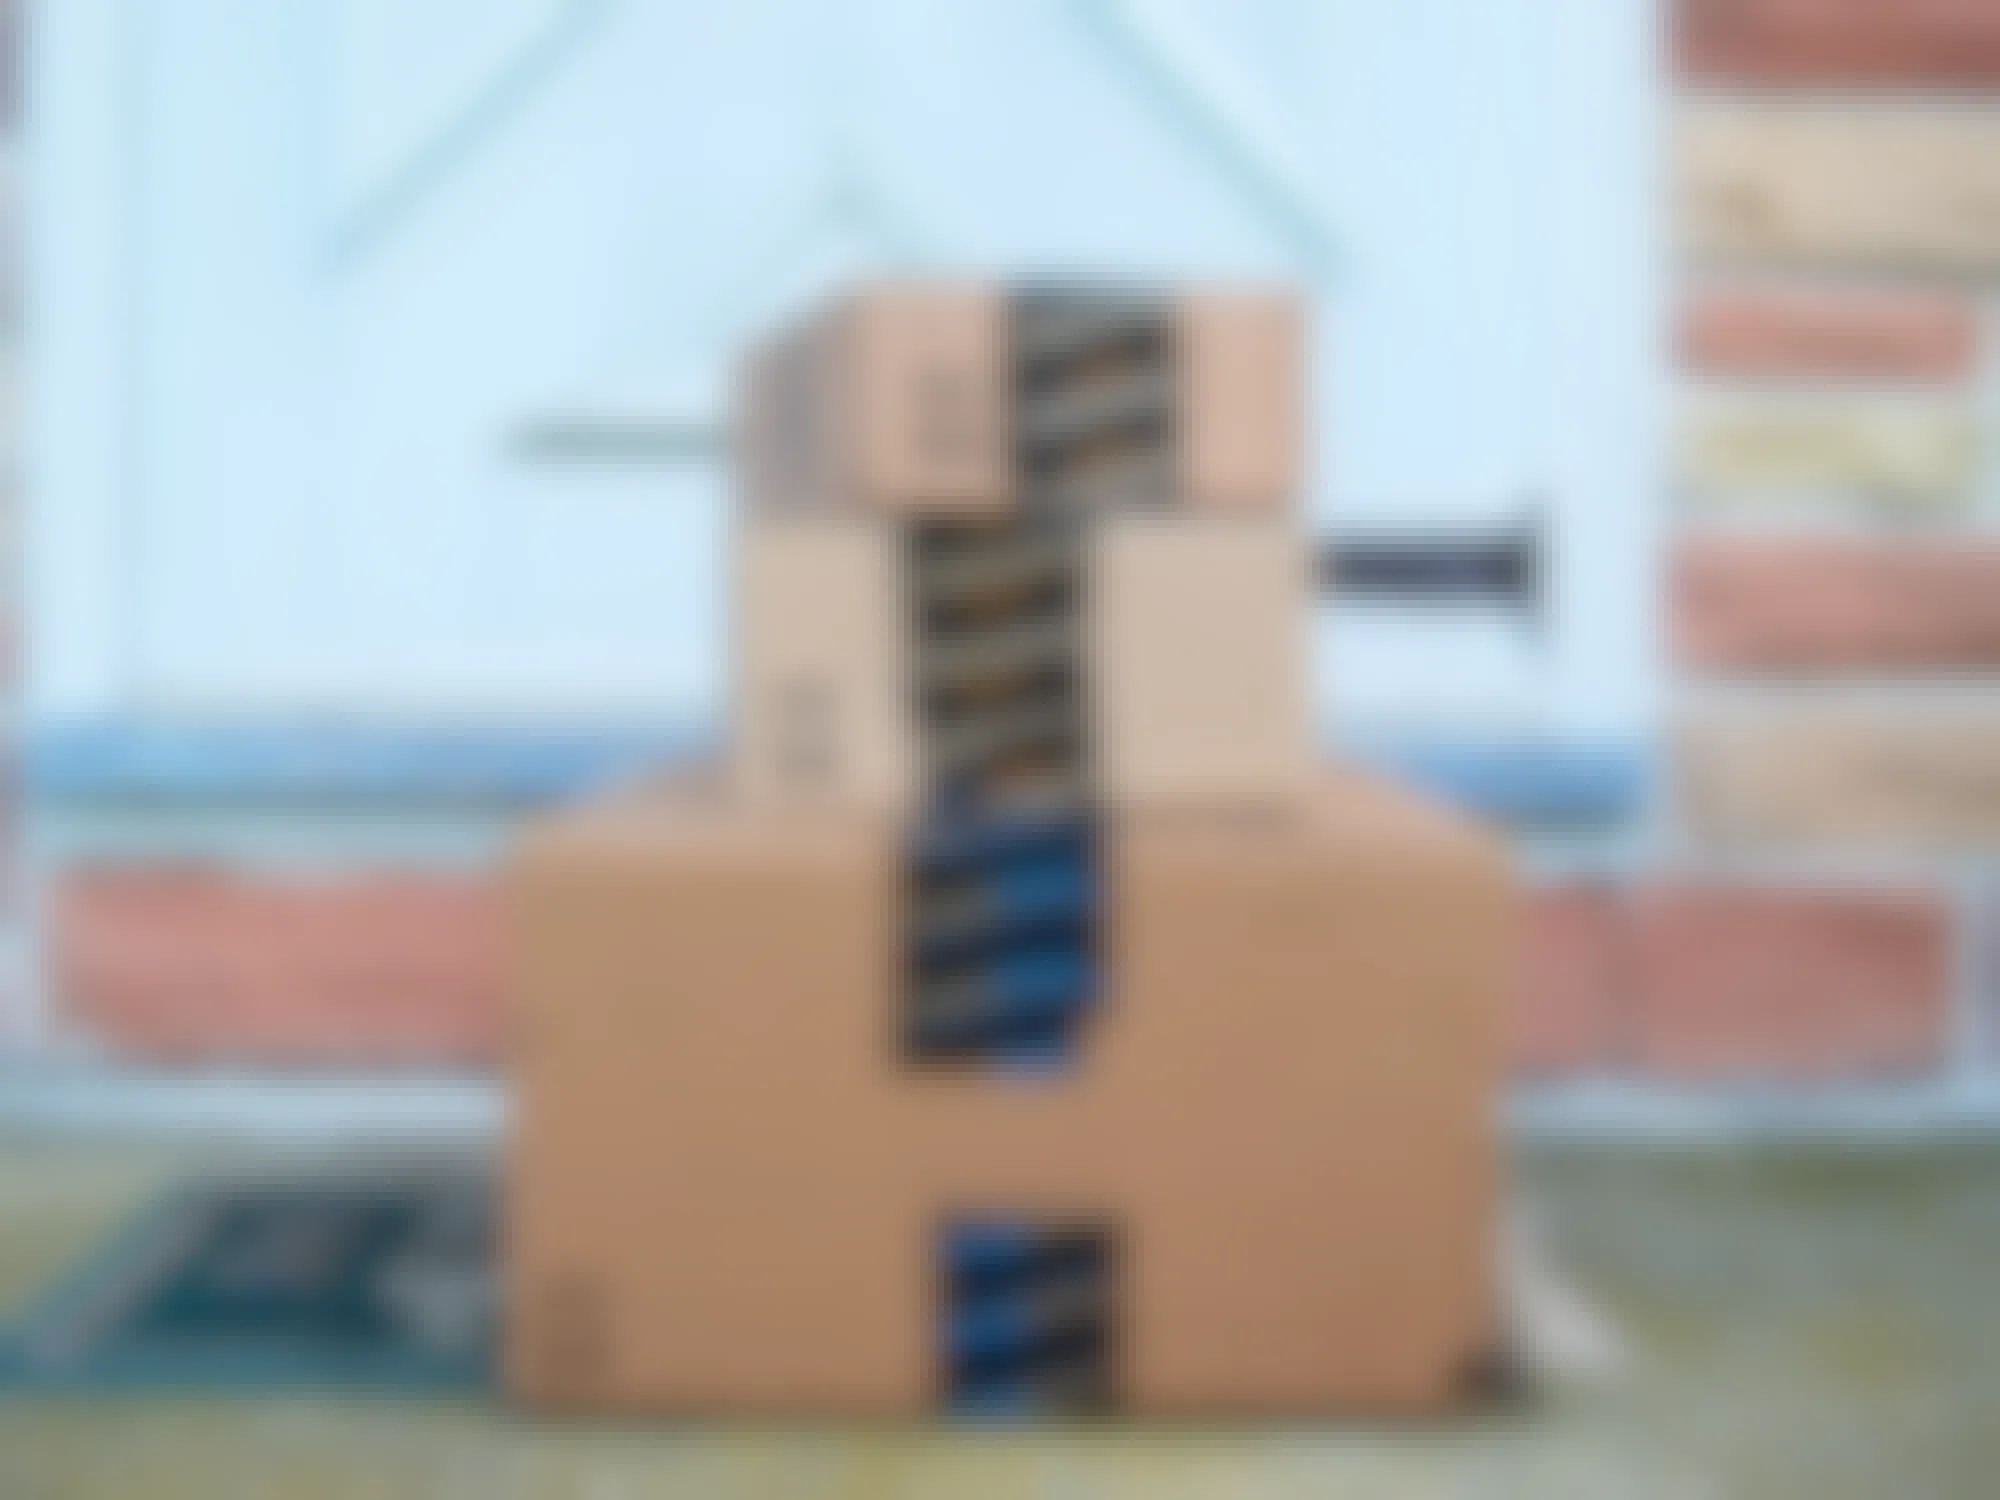 three amazon prime boxes stacked on top of each other